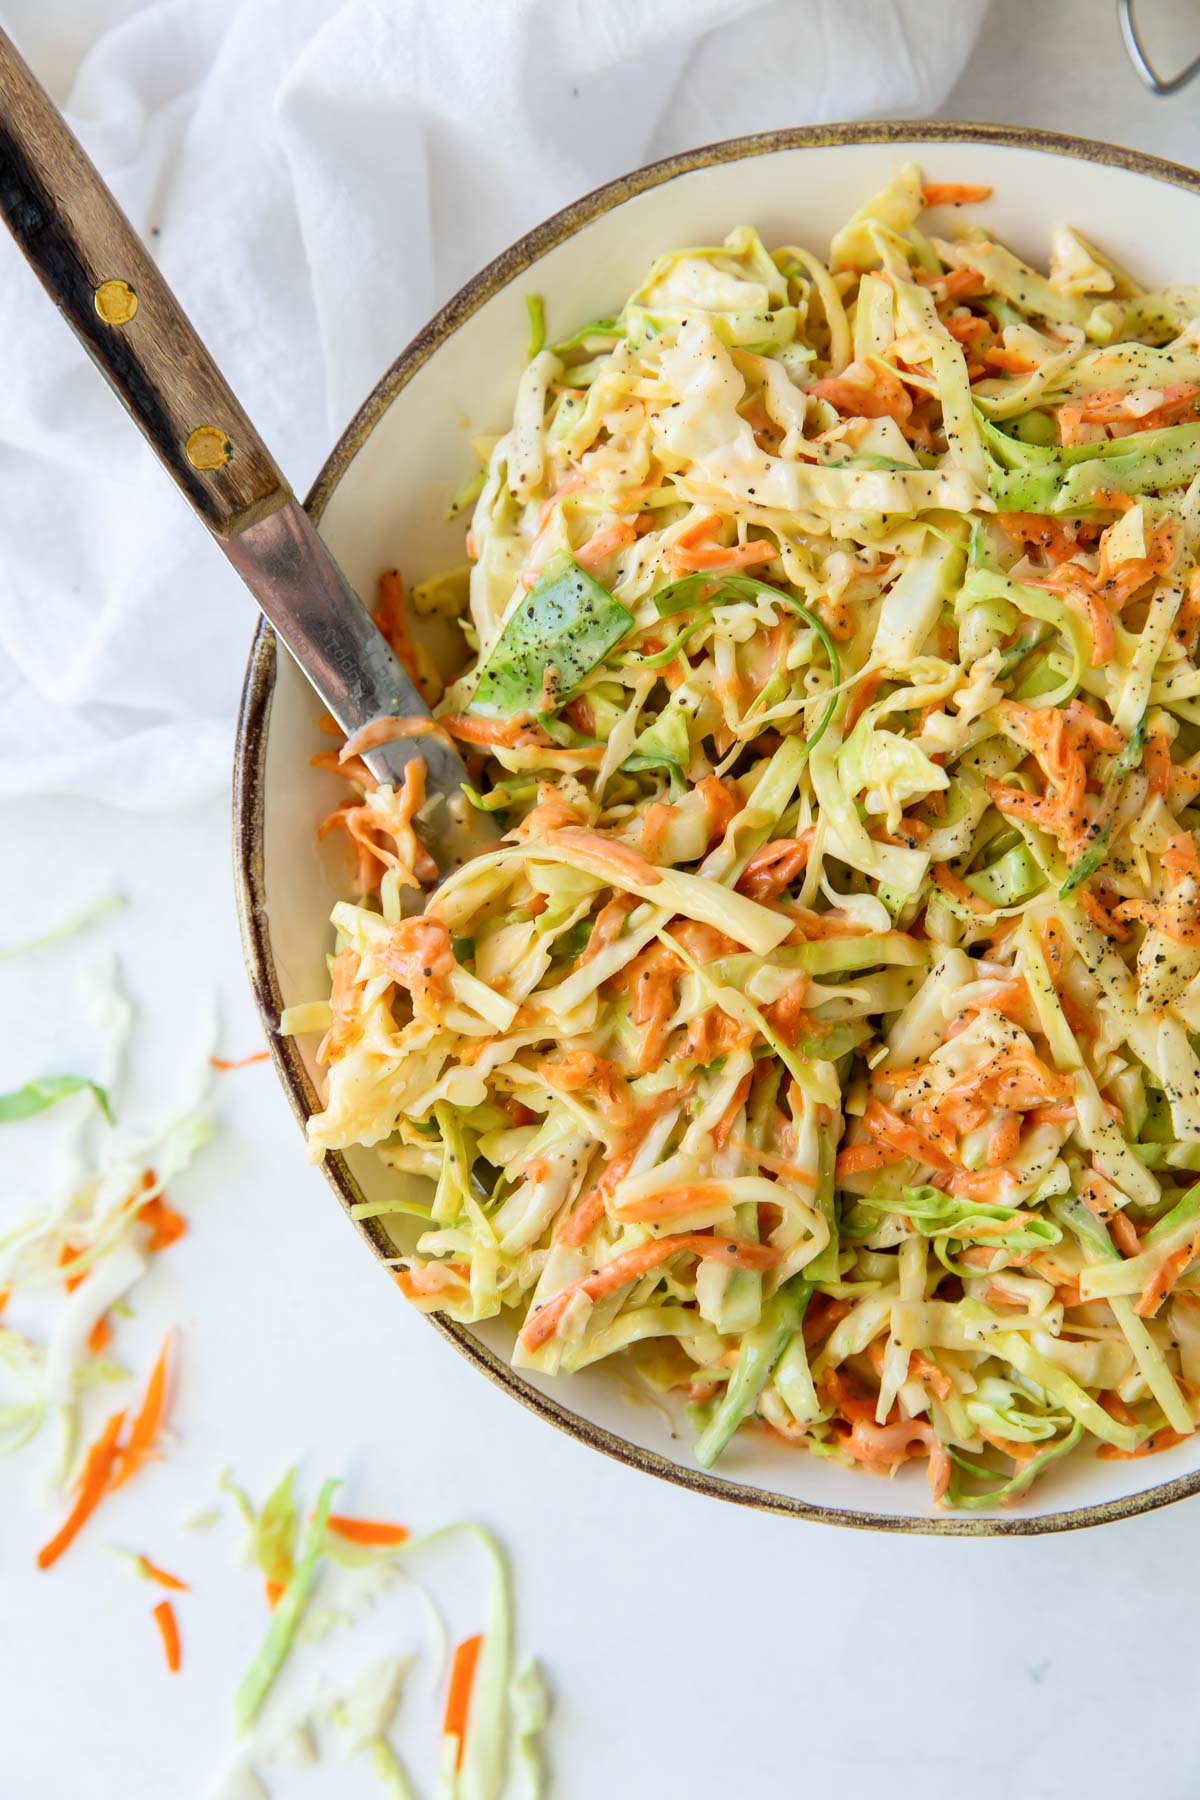 Cabbage and carrot coleslaw in a bowl with a serving spoon.